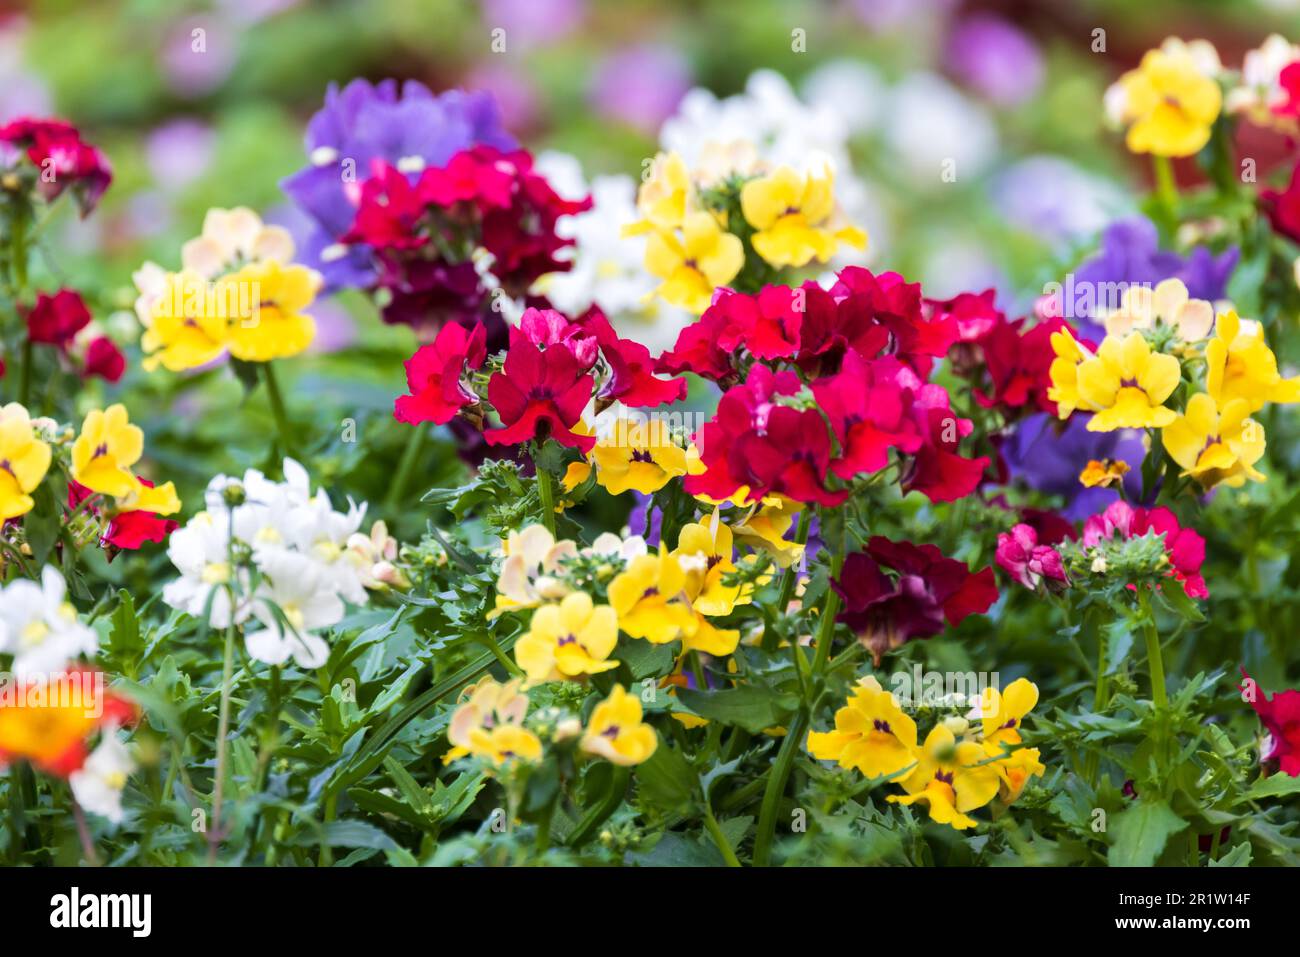 Colorful flowers in a garden. Nemesia is a genus of annuals, perennials and sub-shrubs which are native to sandy coasts or disturbed ground in South A Stock Photo